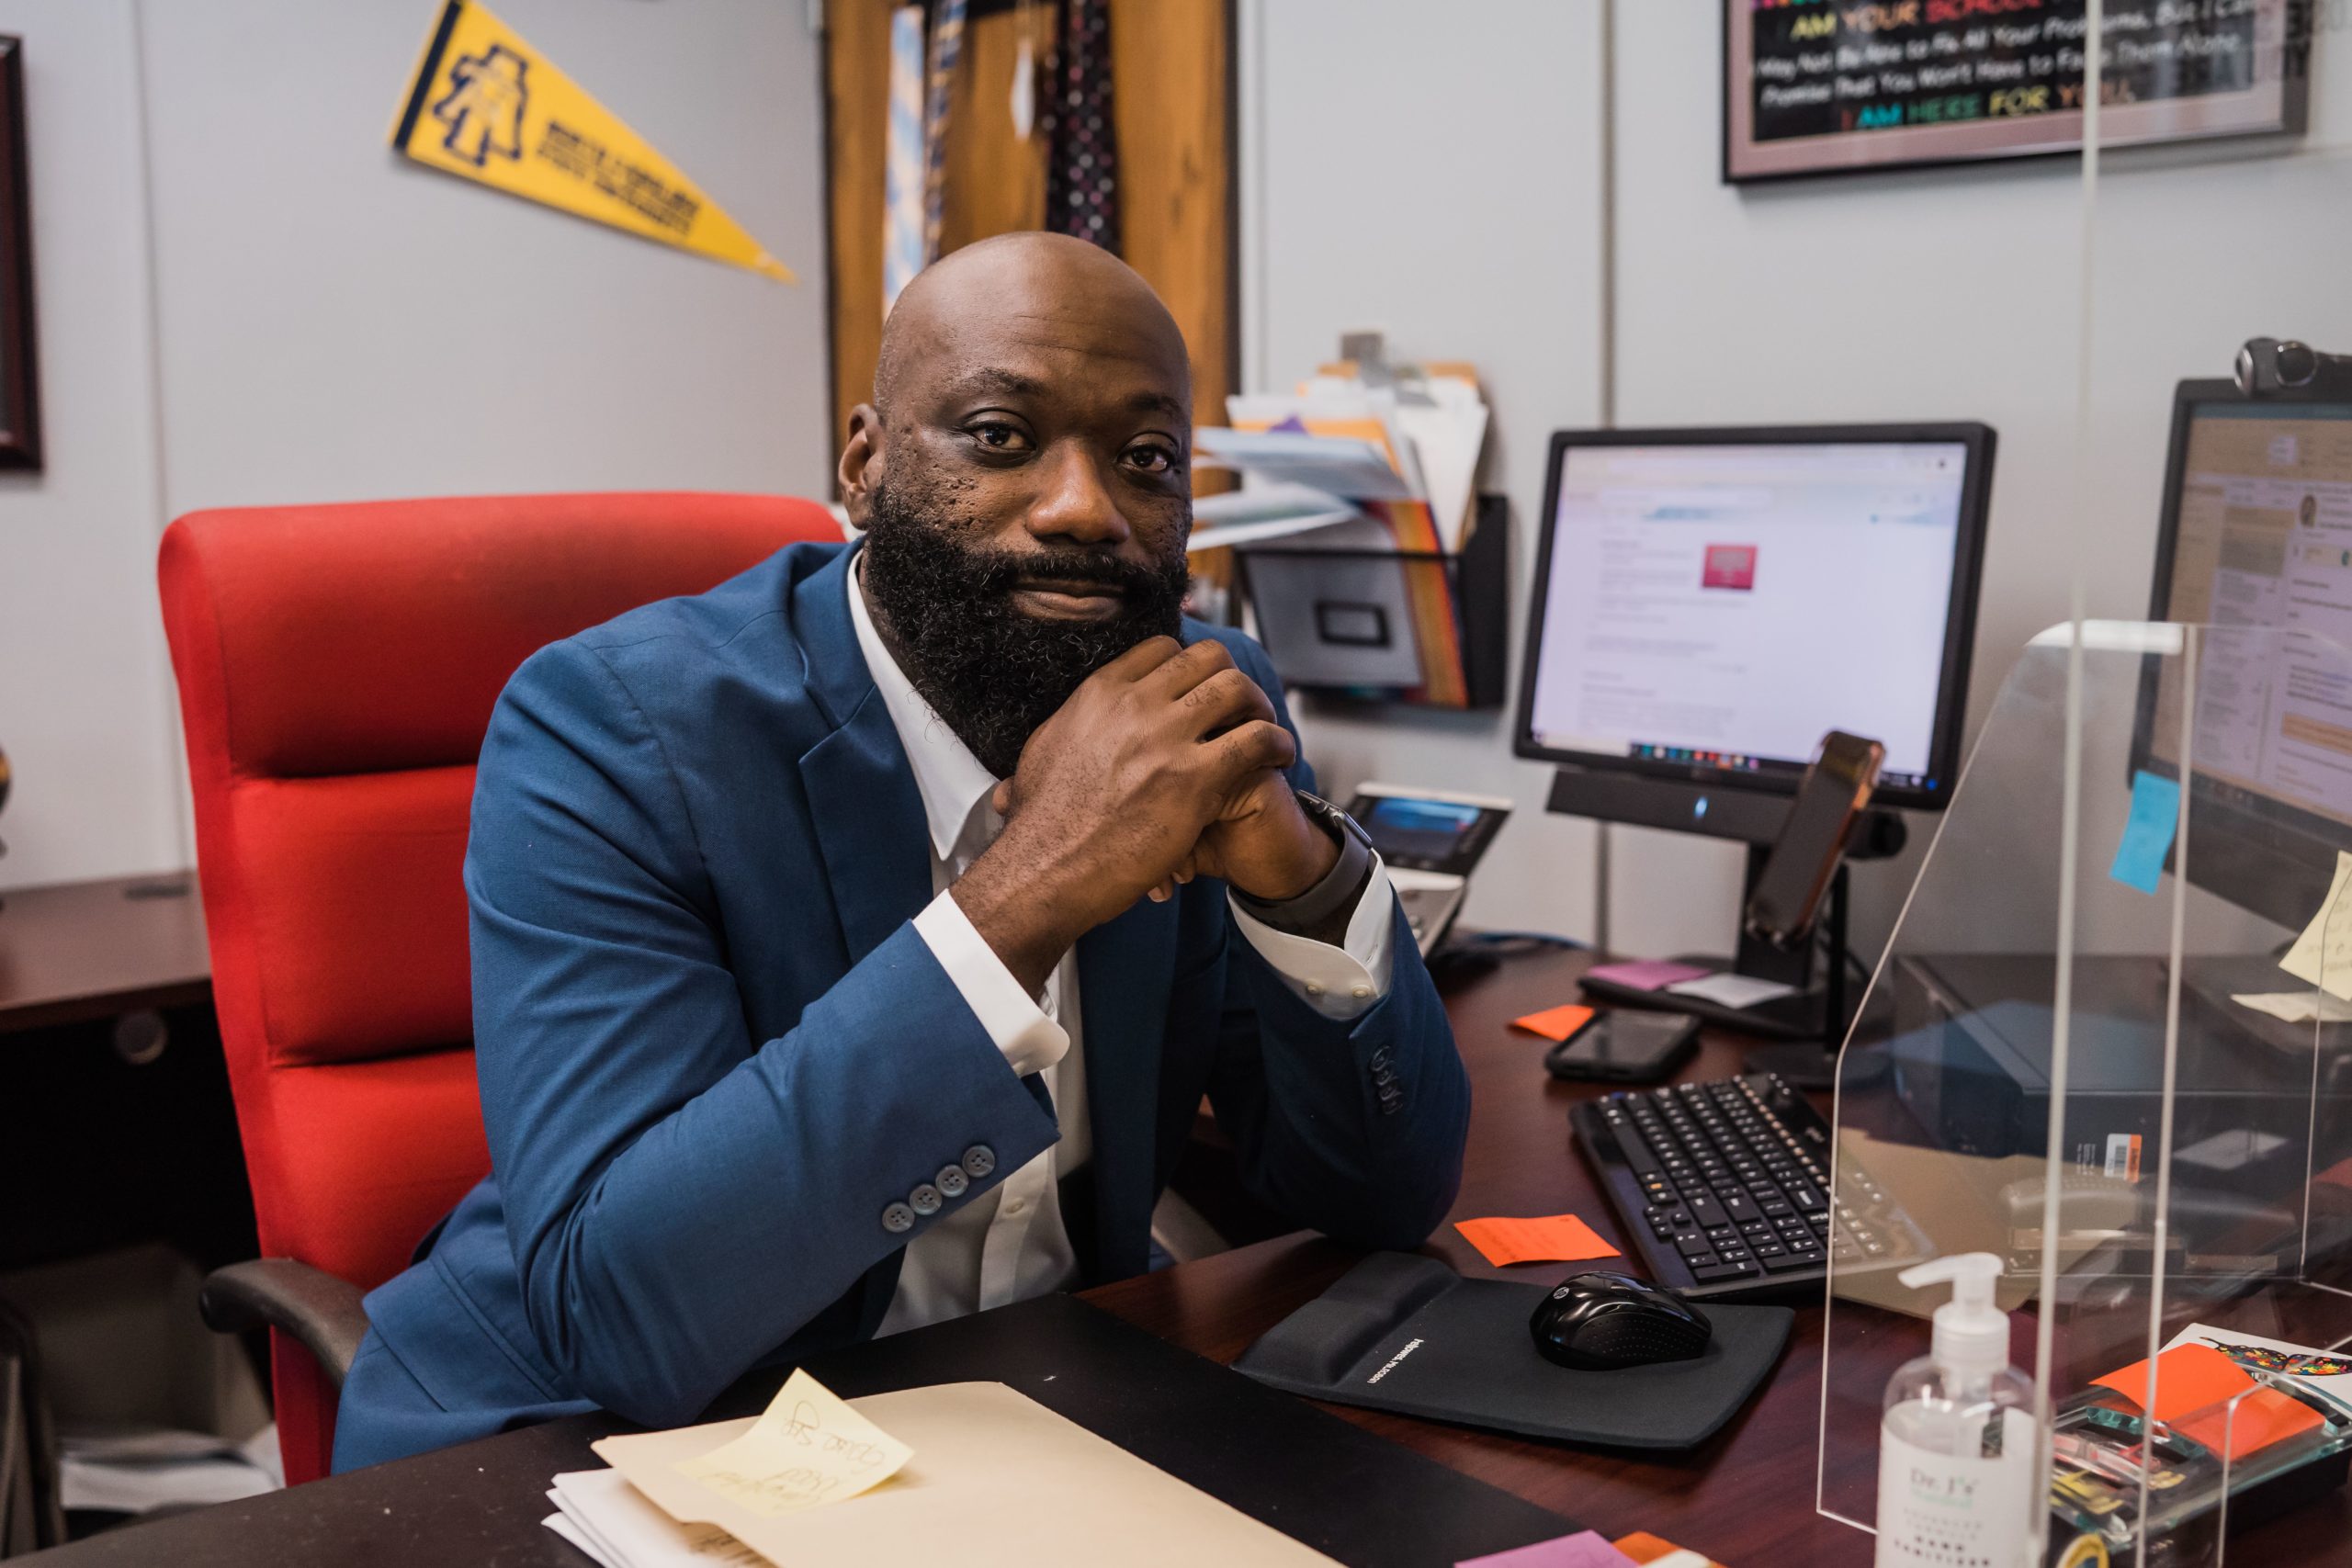 Dr. Marcus Gause, sits at his desk at T. Wingate Andrews High School in High Point, NC.